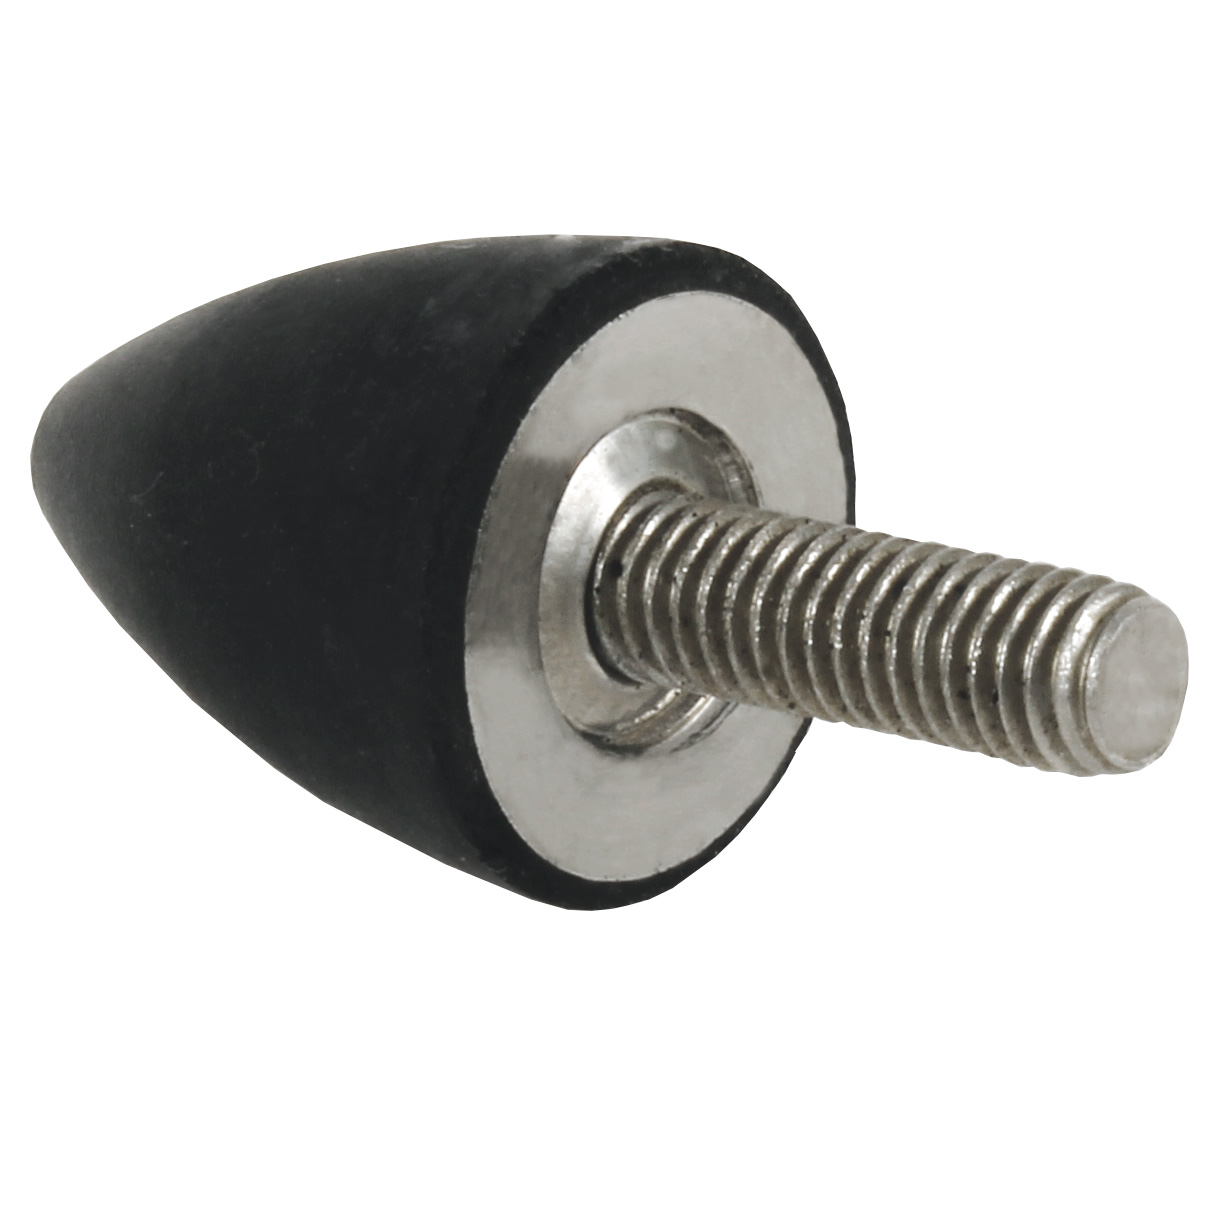 Stainless steel elasto mount - stainless steel - Conical - 1 side Male